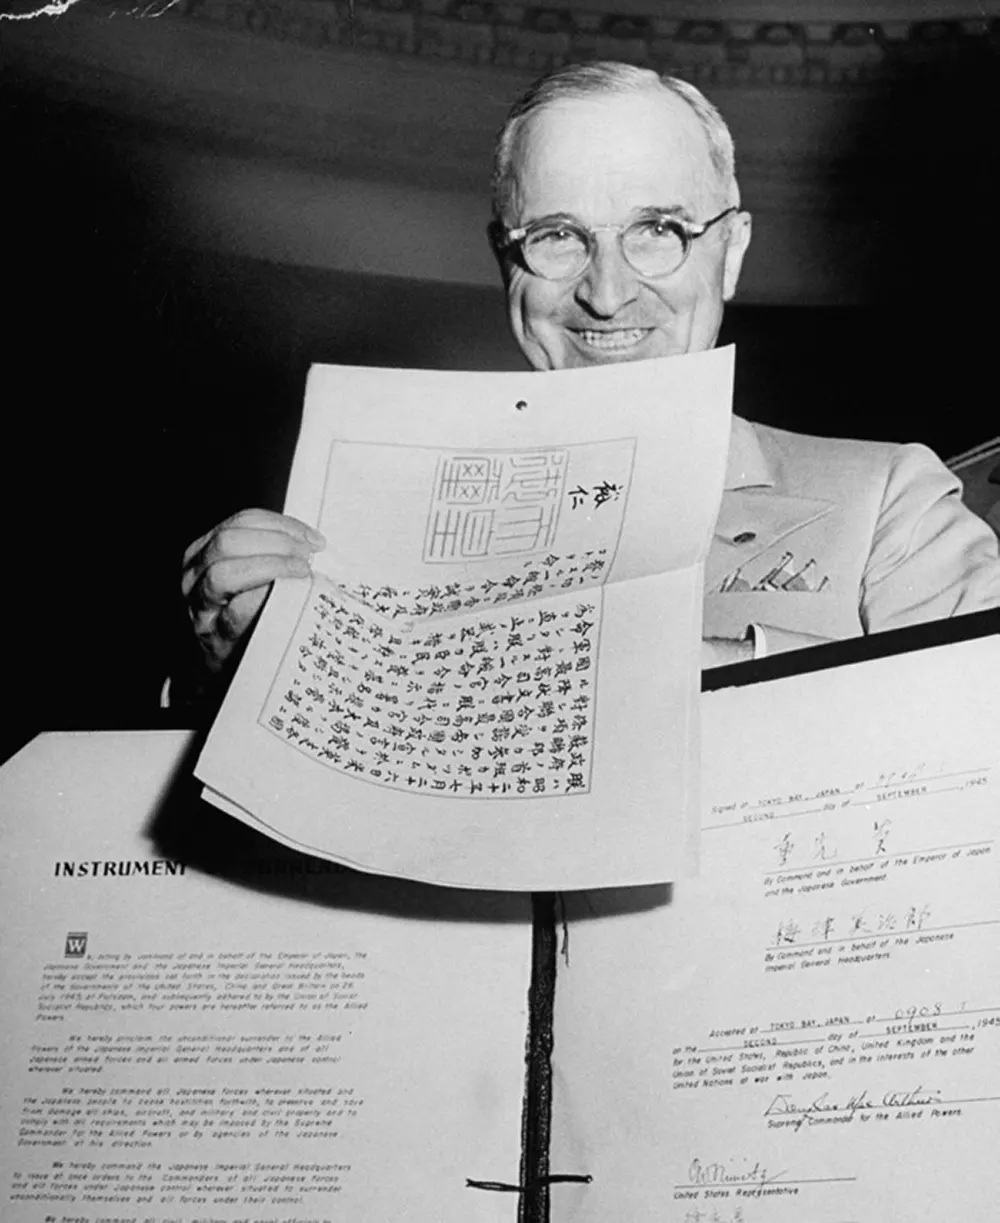 President Truman with the Japanese surrender documents.